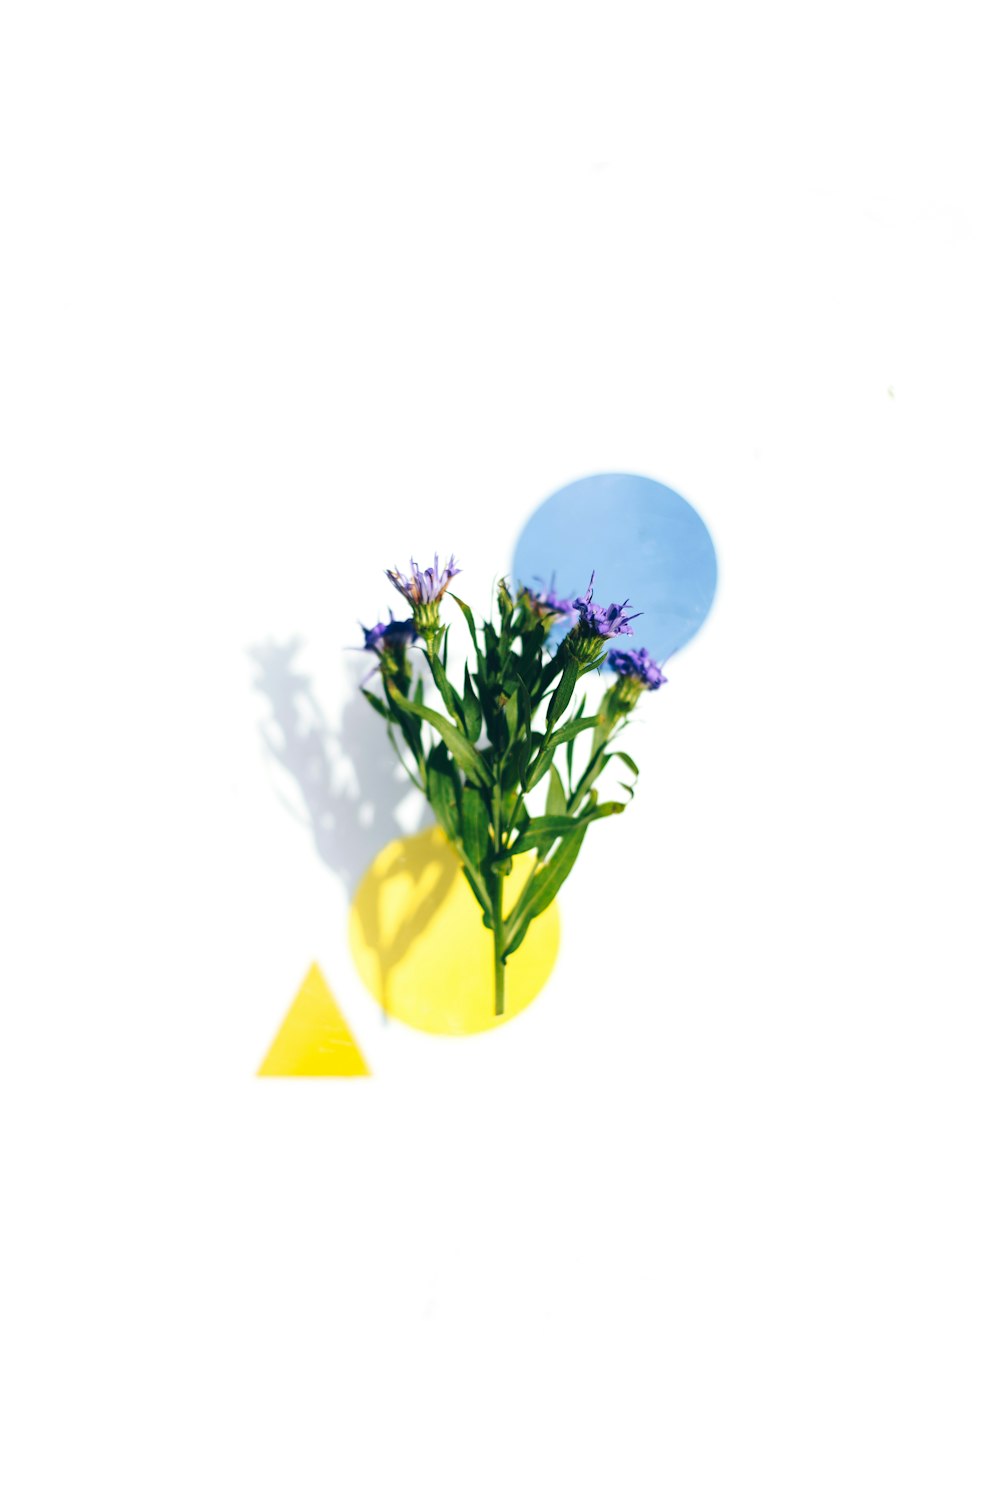 a yellow vase with some purple flowers in it